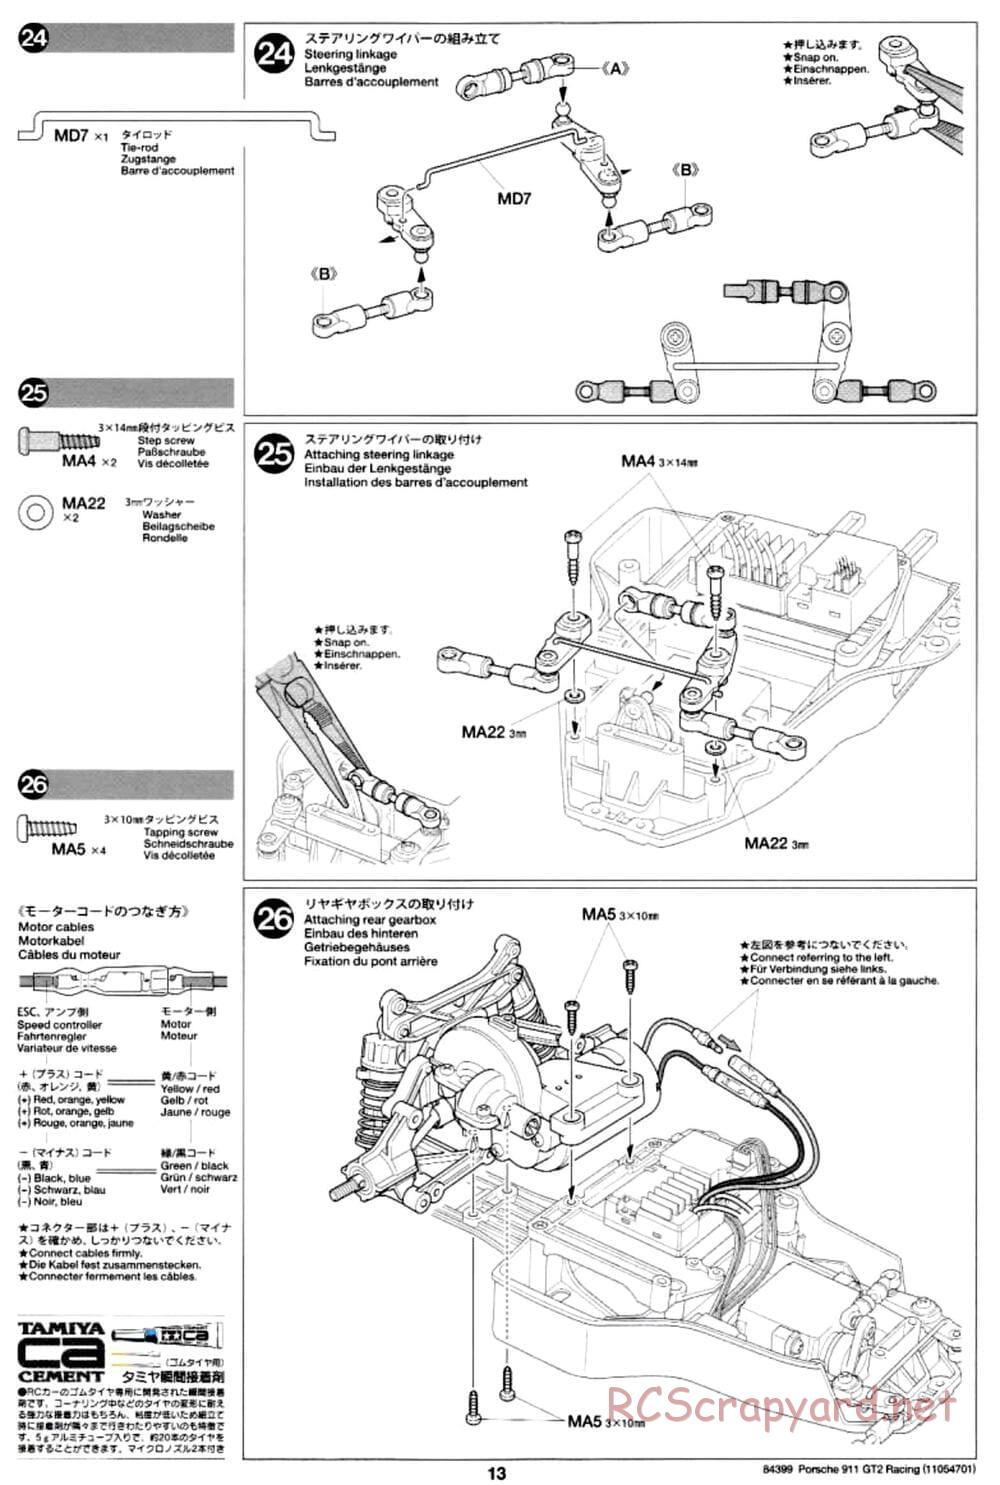 Tamiya - Porsche 911 GT2 Racing - TA02SW Chassis - Manual - Page 13